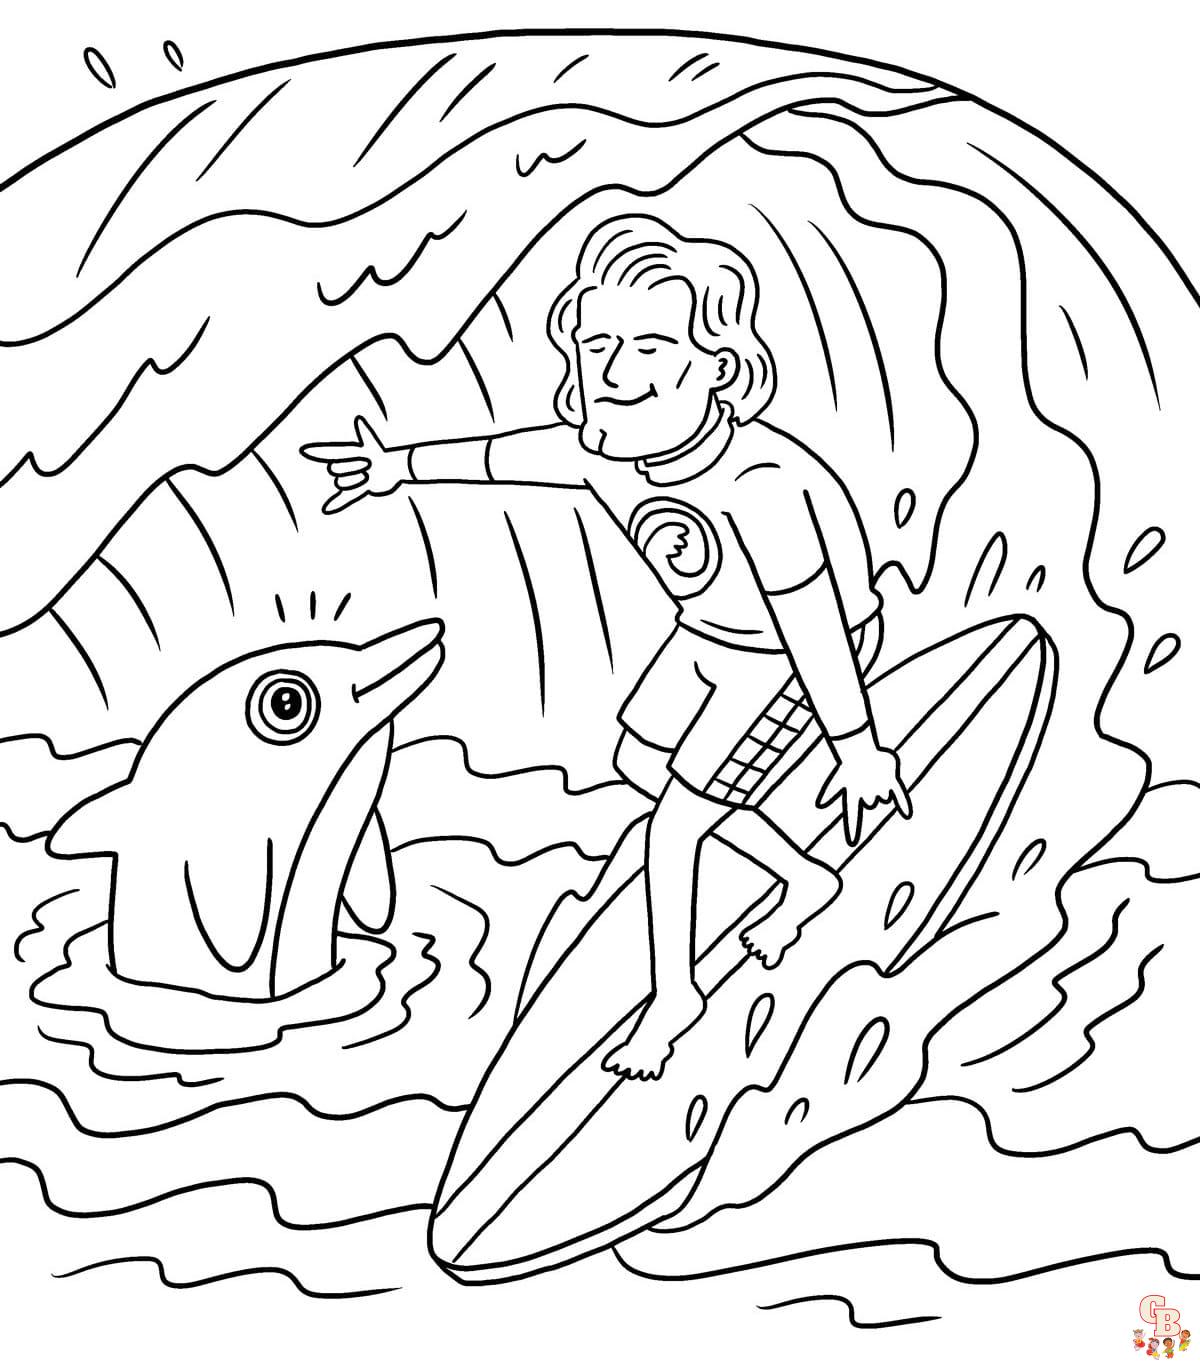 Surfing Coloring Pages